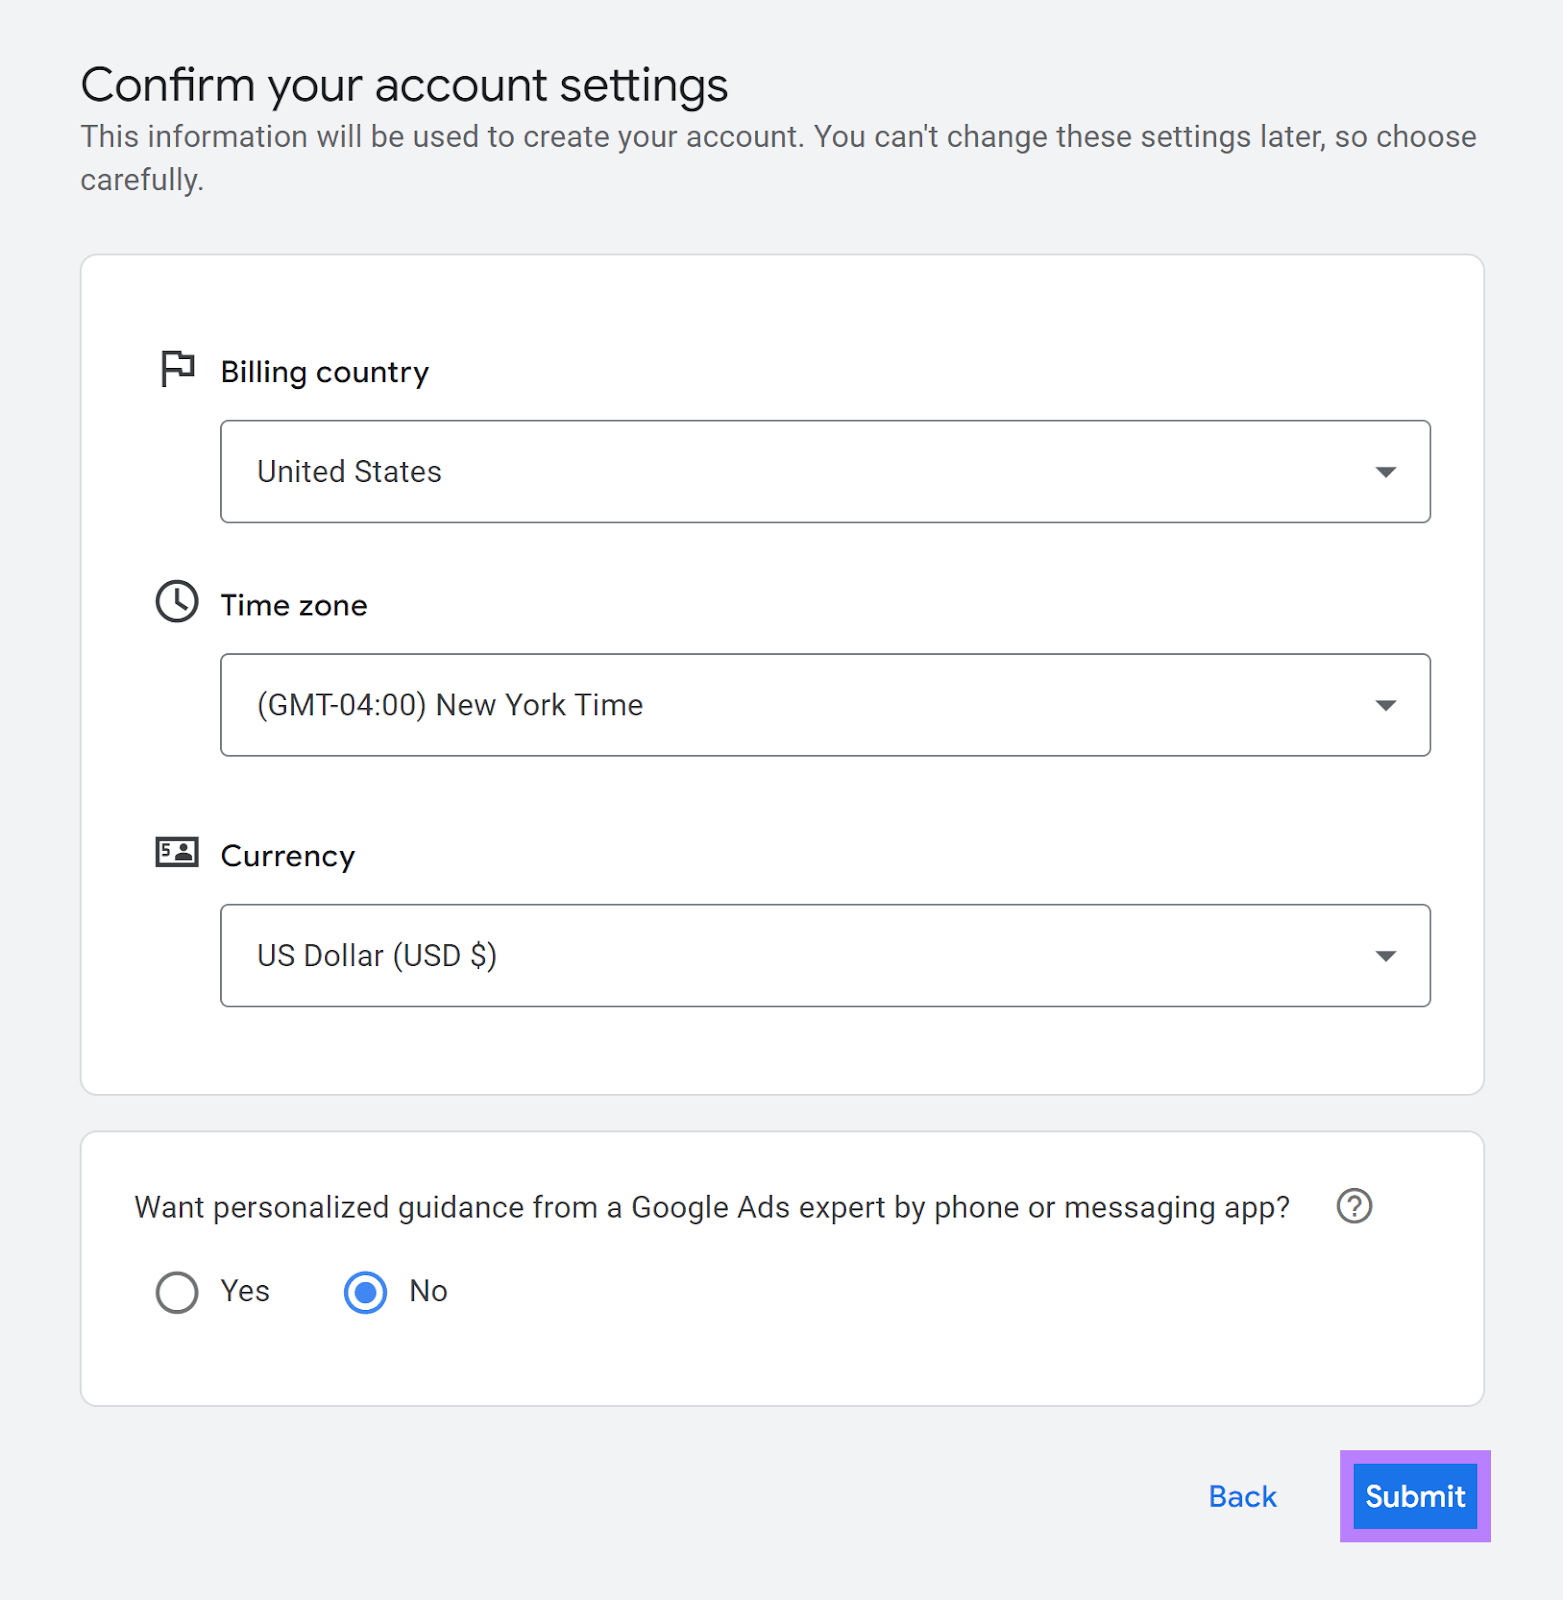 Confirm Account settings form completed and Submit button highlighted.